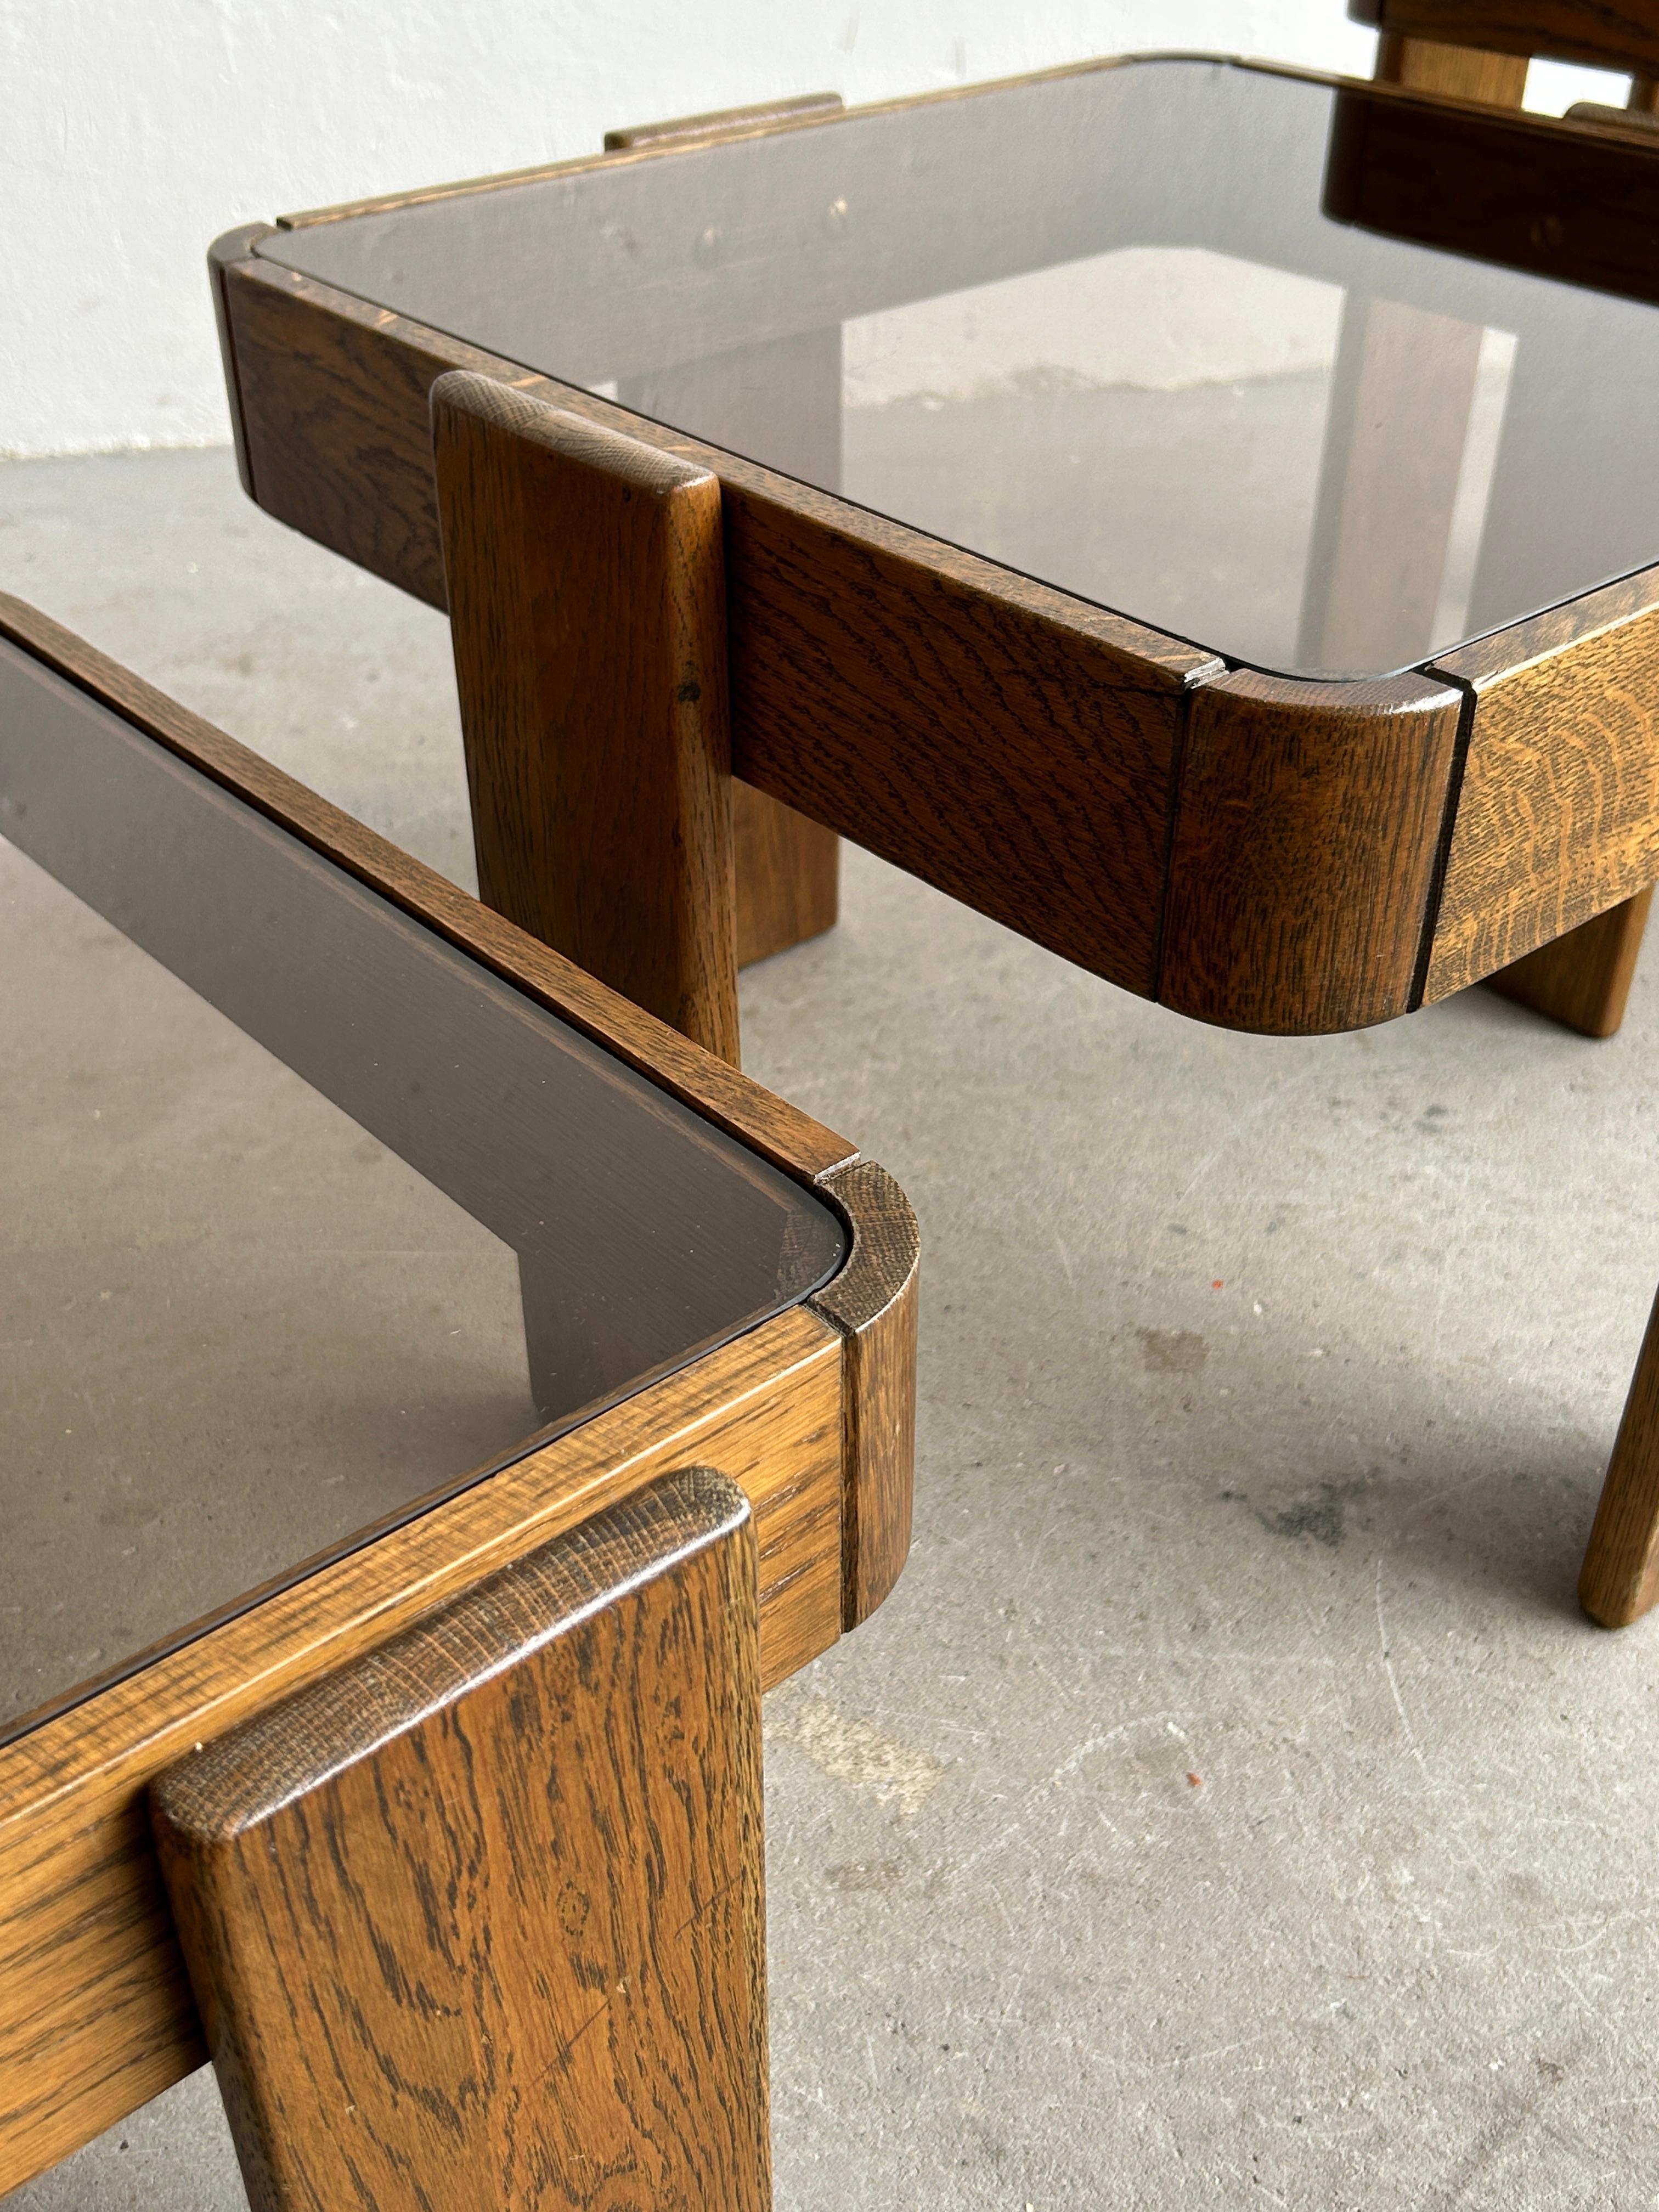 European Vintage Set of Three Nesting Tables, Designed by Gianfranco Frattini for Cassina